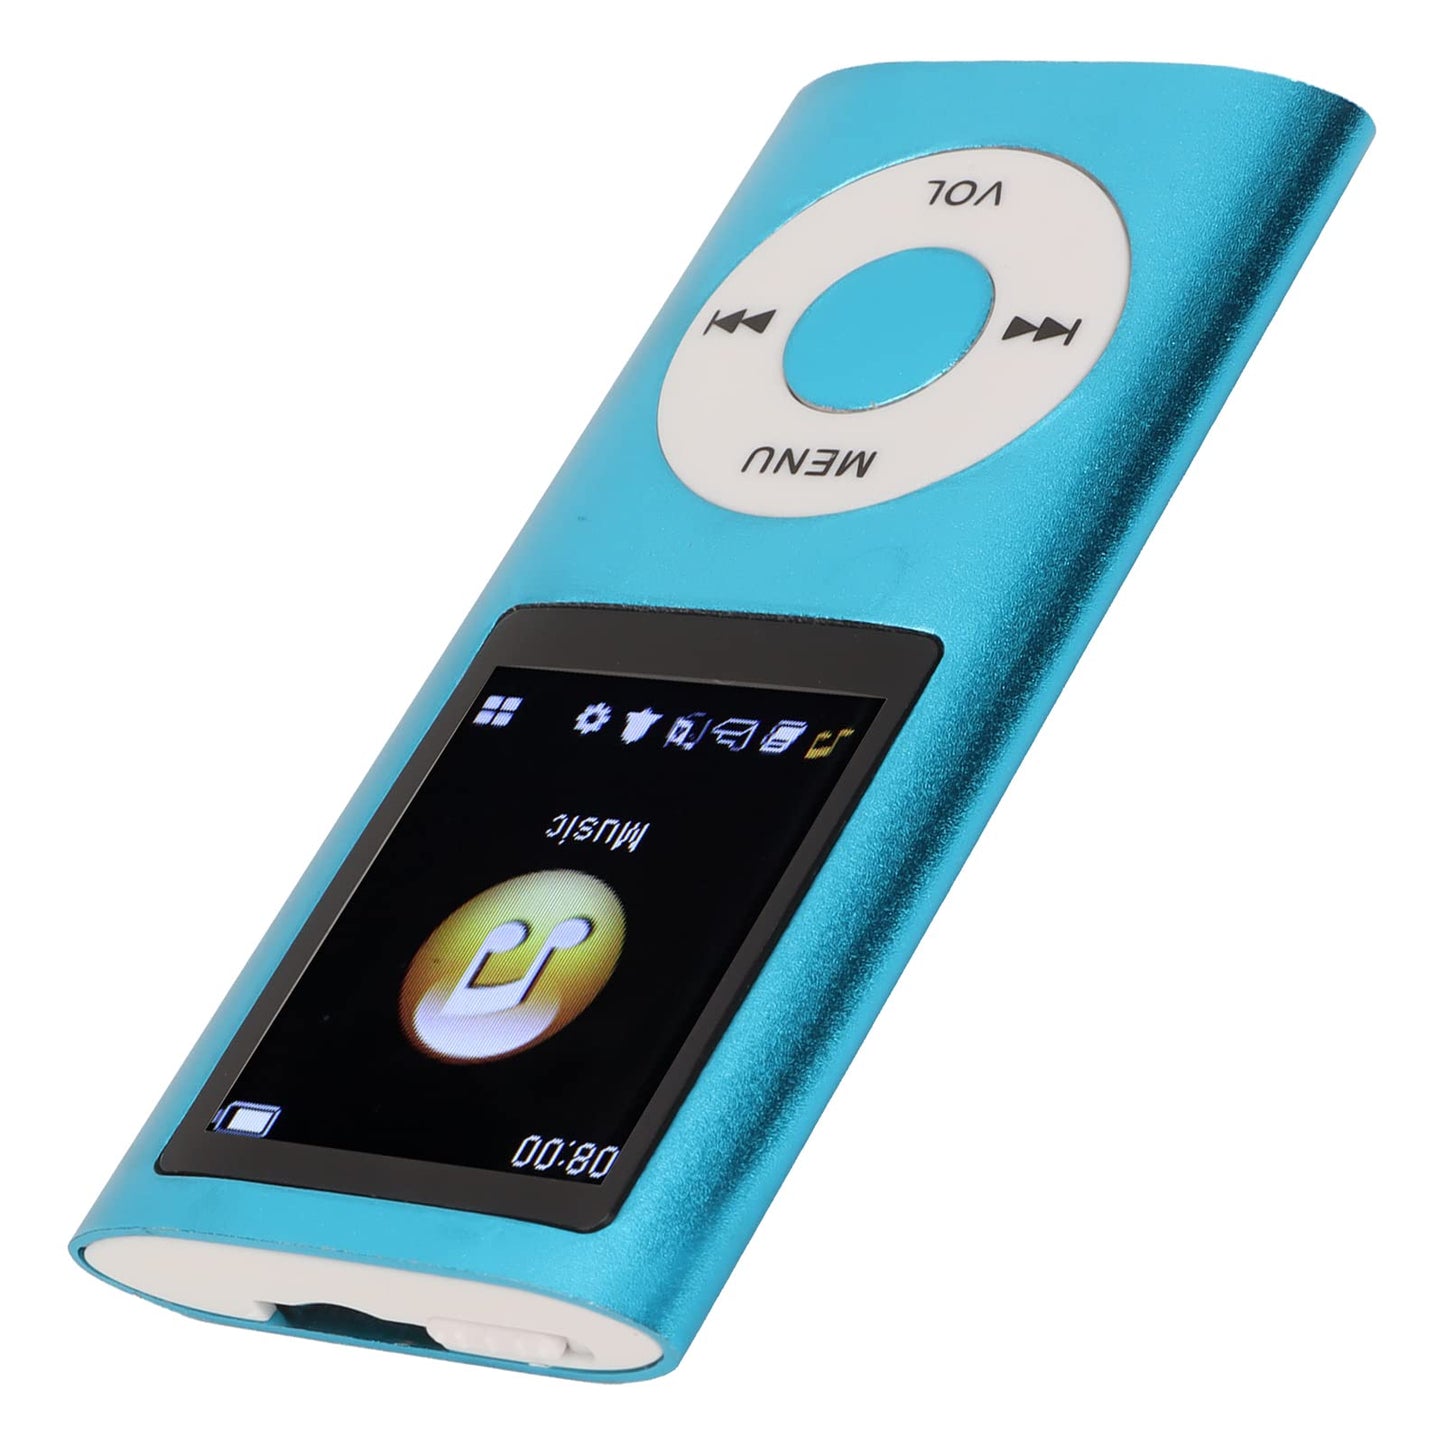 Yctze MP3/MP4 Player, Portable Music Player with Earphone, 1.8 inch HD Screen, Support up to 64GB Memory Card, 8H Playing time, Super Light Metal Shell(Blue)